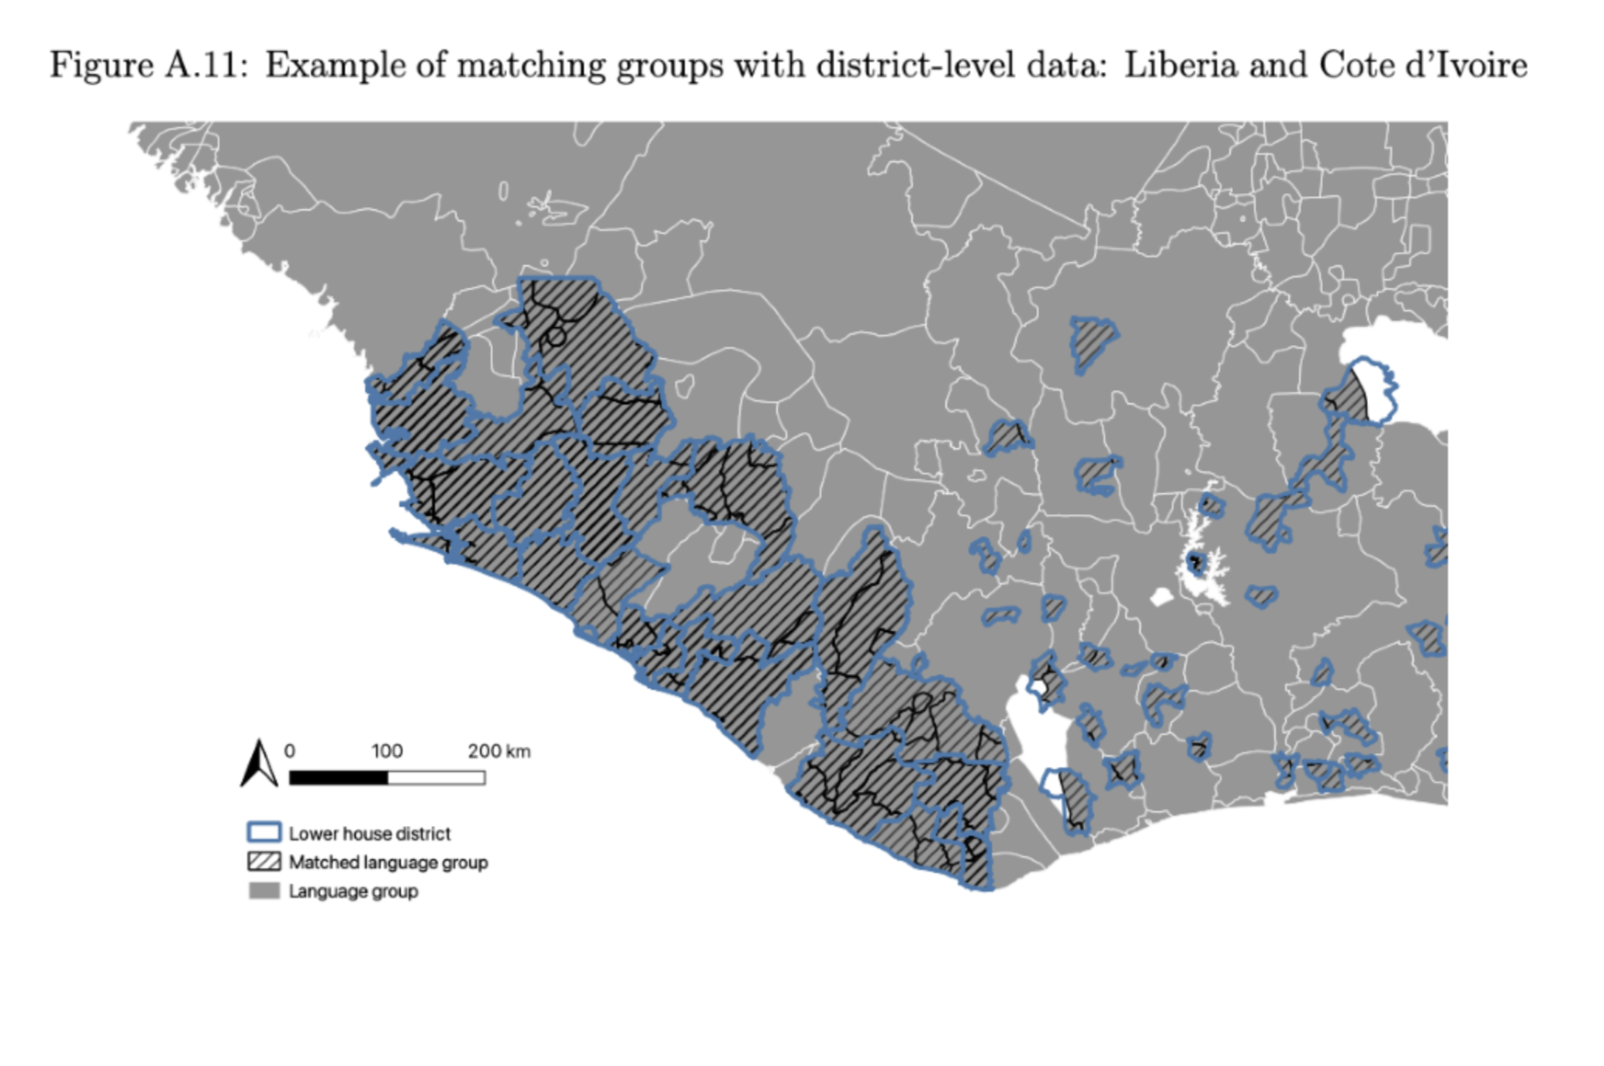 Map showing language groups in Liberia and how they don't exactly match up with electoral districts